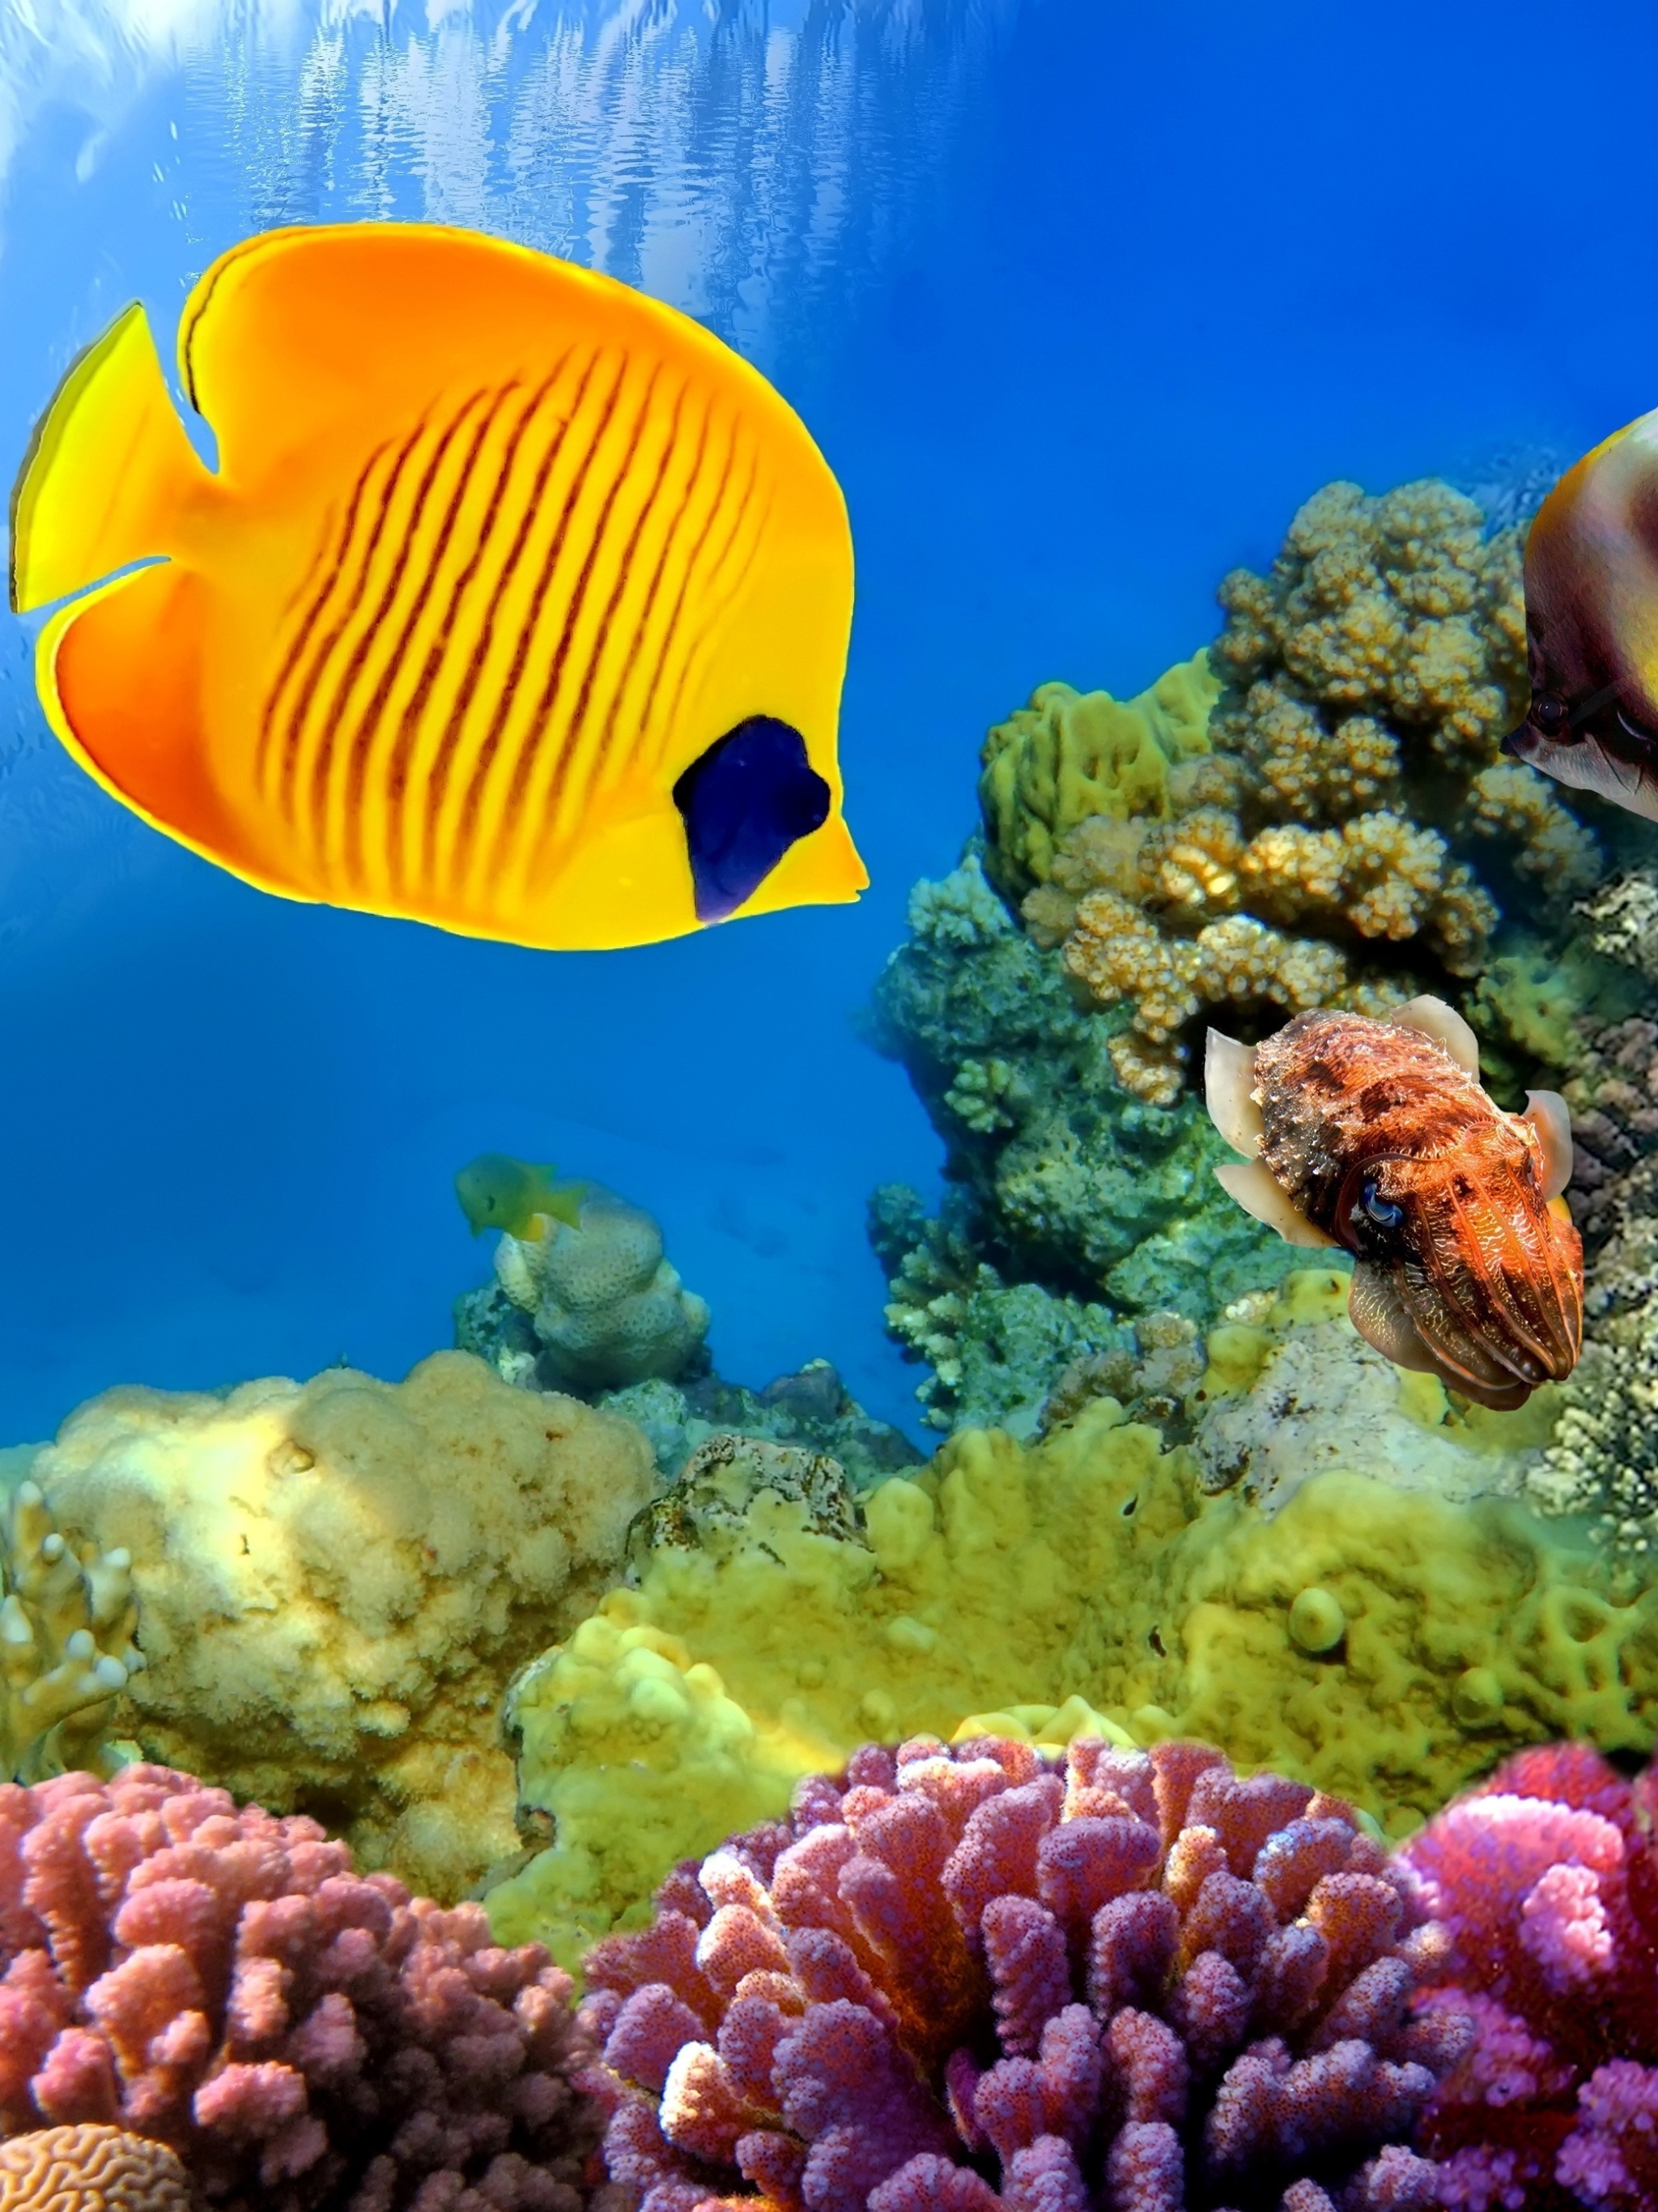 New Lock Screen Wallpapers animal, fish, coral reef, butterflyfish, underwater, fishes